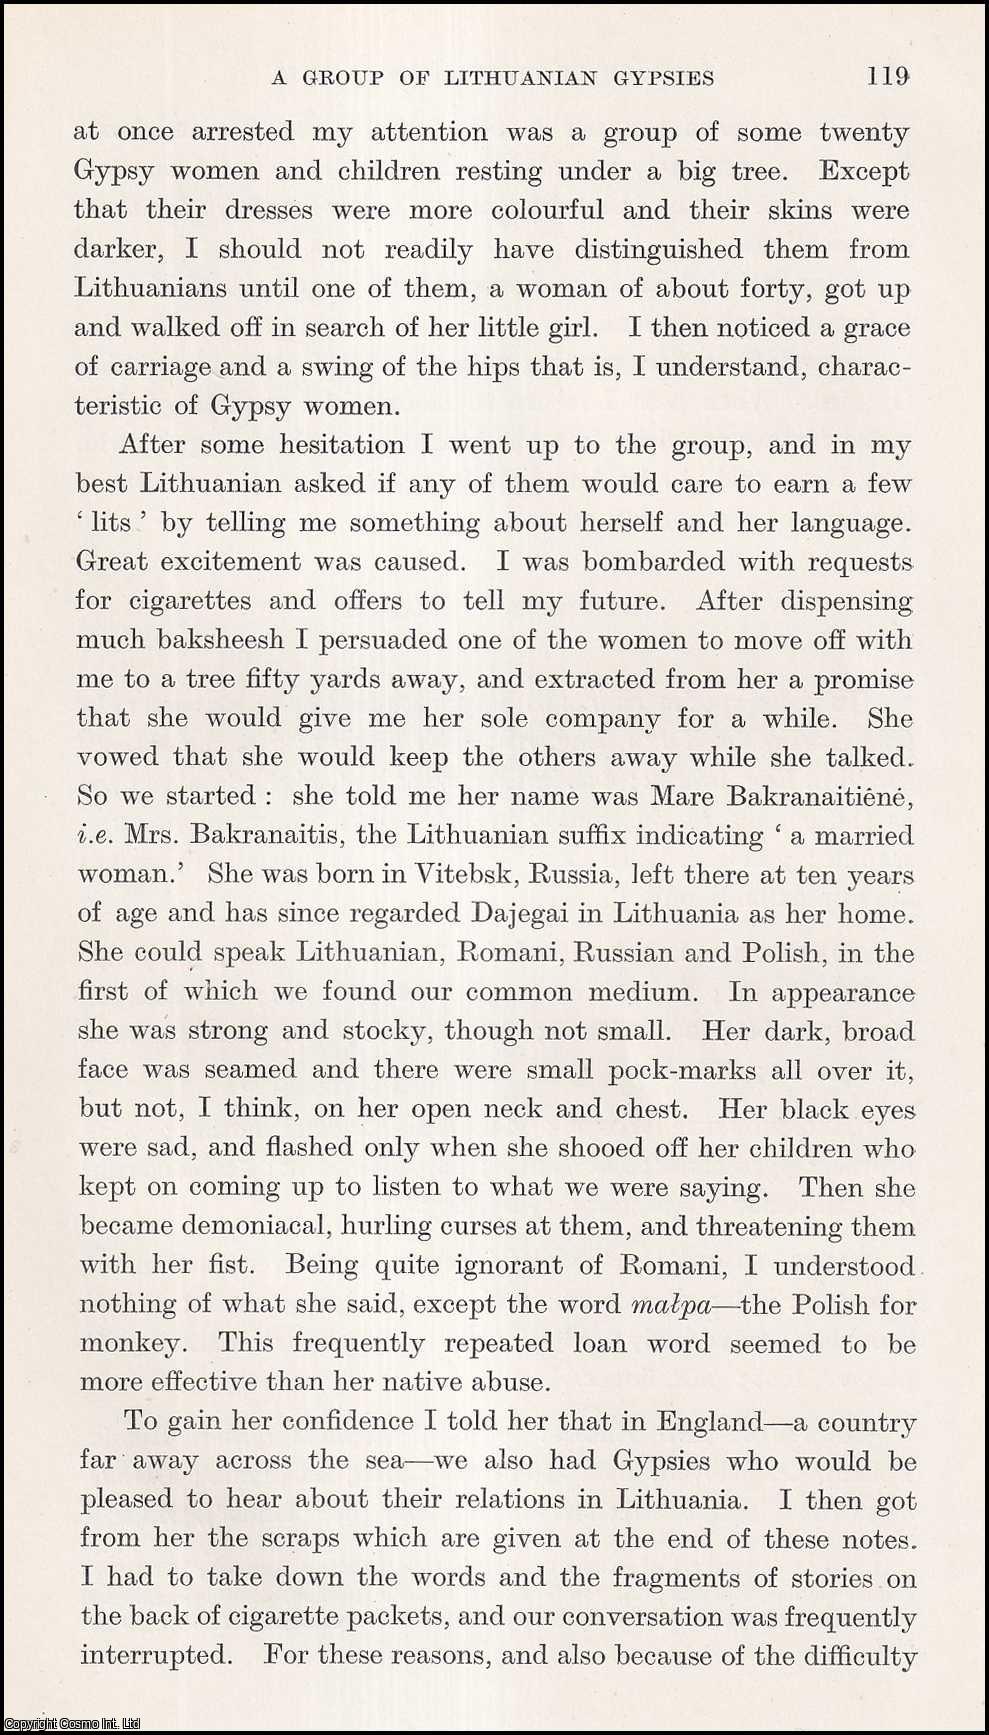 N.B. Jopson - A Group of Lithuanian Gypsies. An uncommon original article from the Journal of the Gypsy Lore Society, 1939.